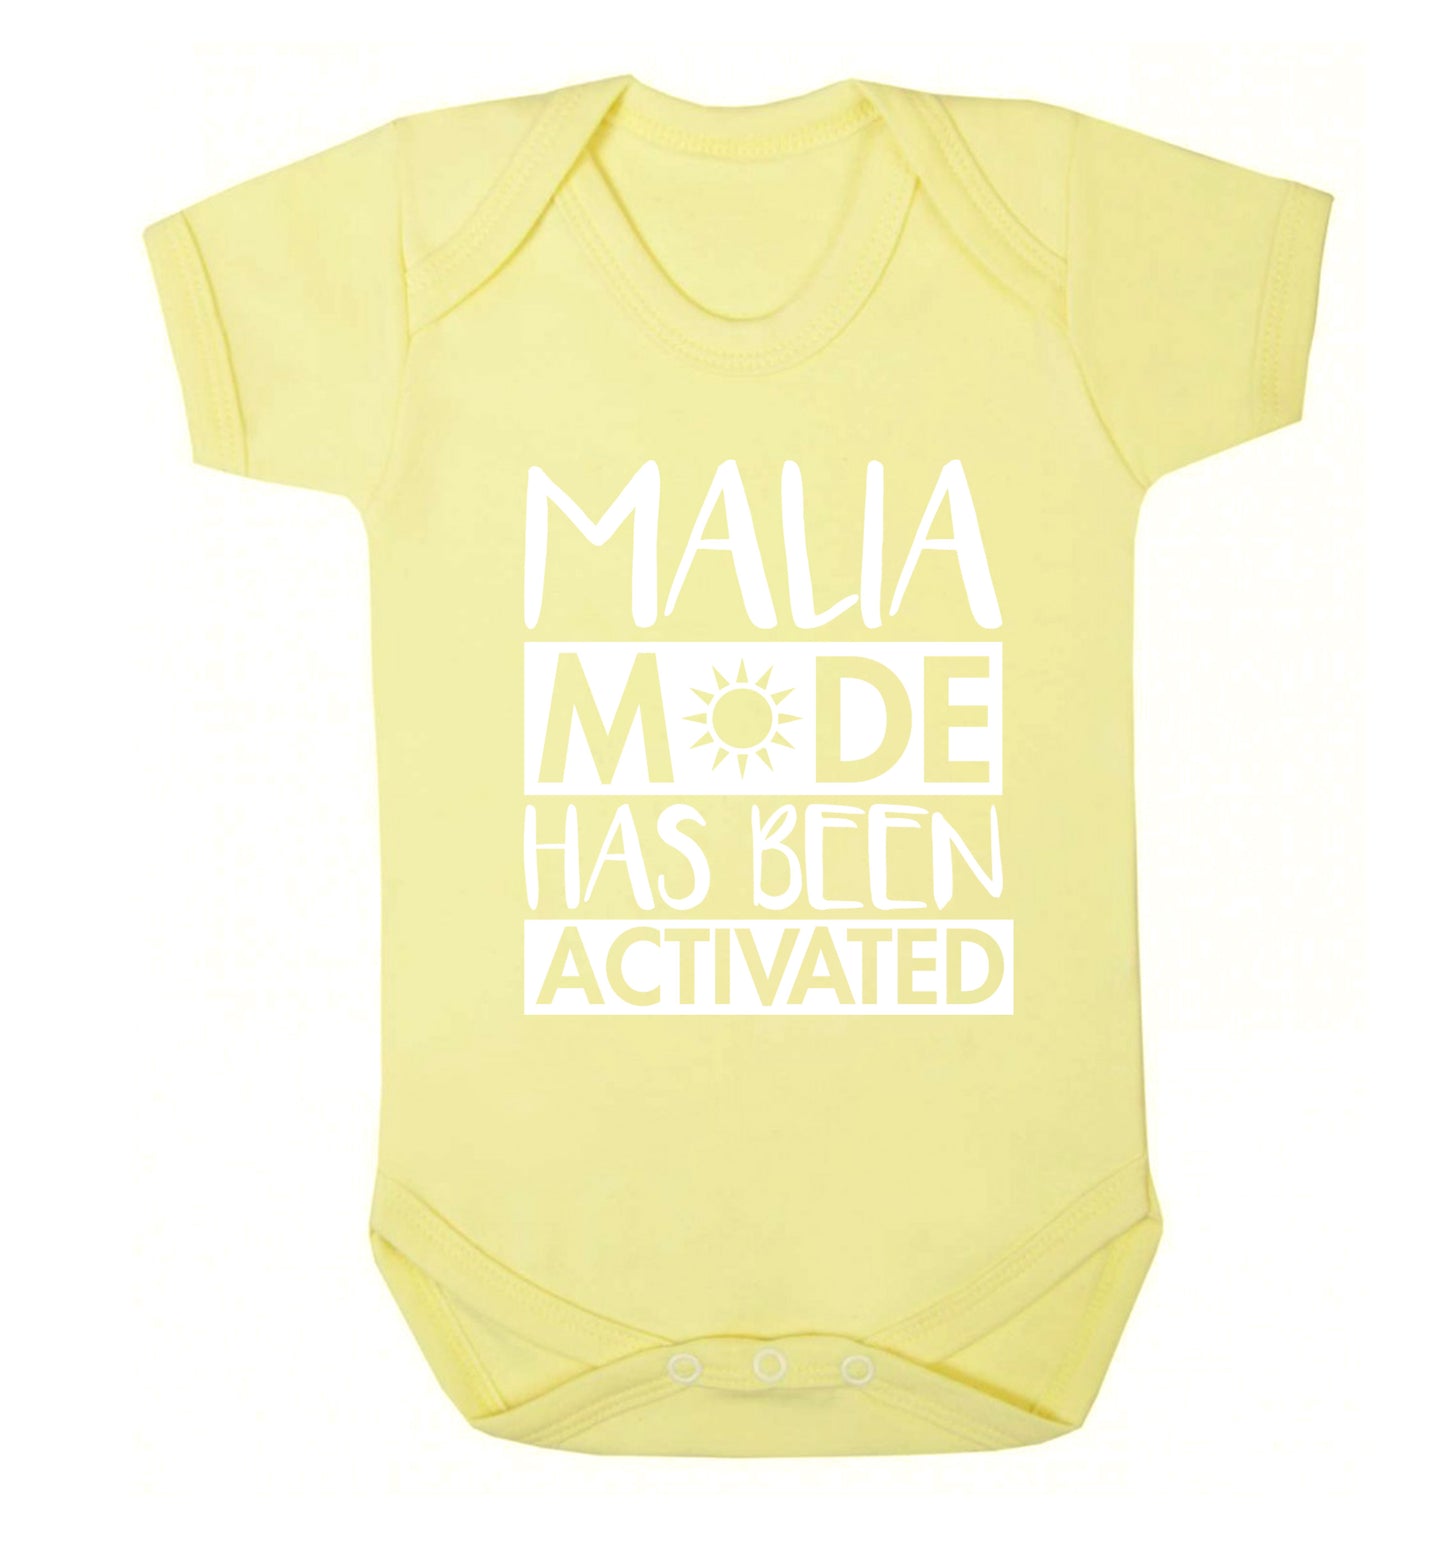 Malia mode has been activated Baby Vest pale yellow 18-24 months